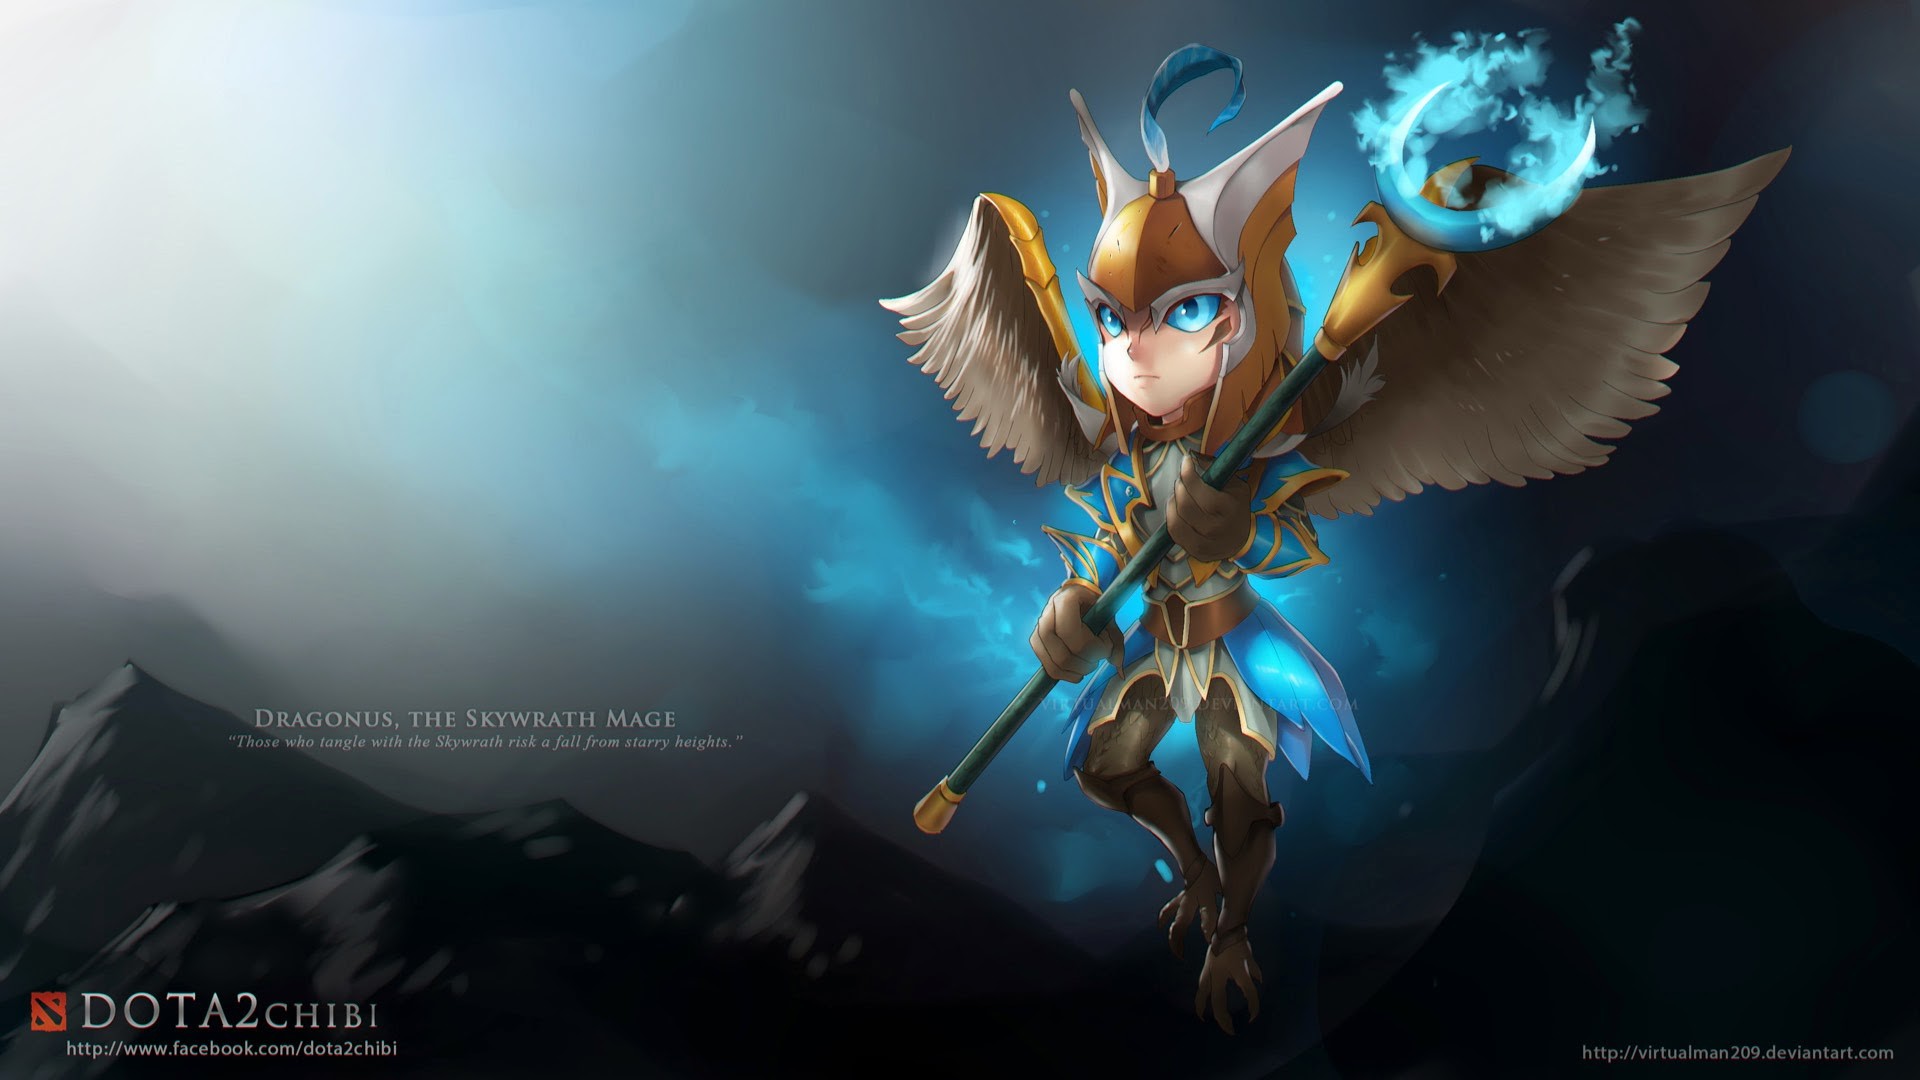 1920x1080 Dota 2 Heroes Wallpaper  Awesome Luxury Elegant Best Of Beautiful  Fresh Inspirational Lovely Unique New